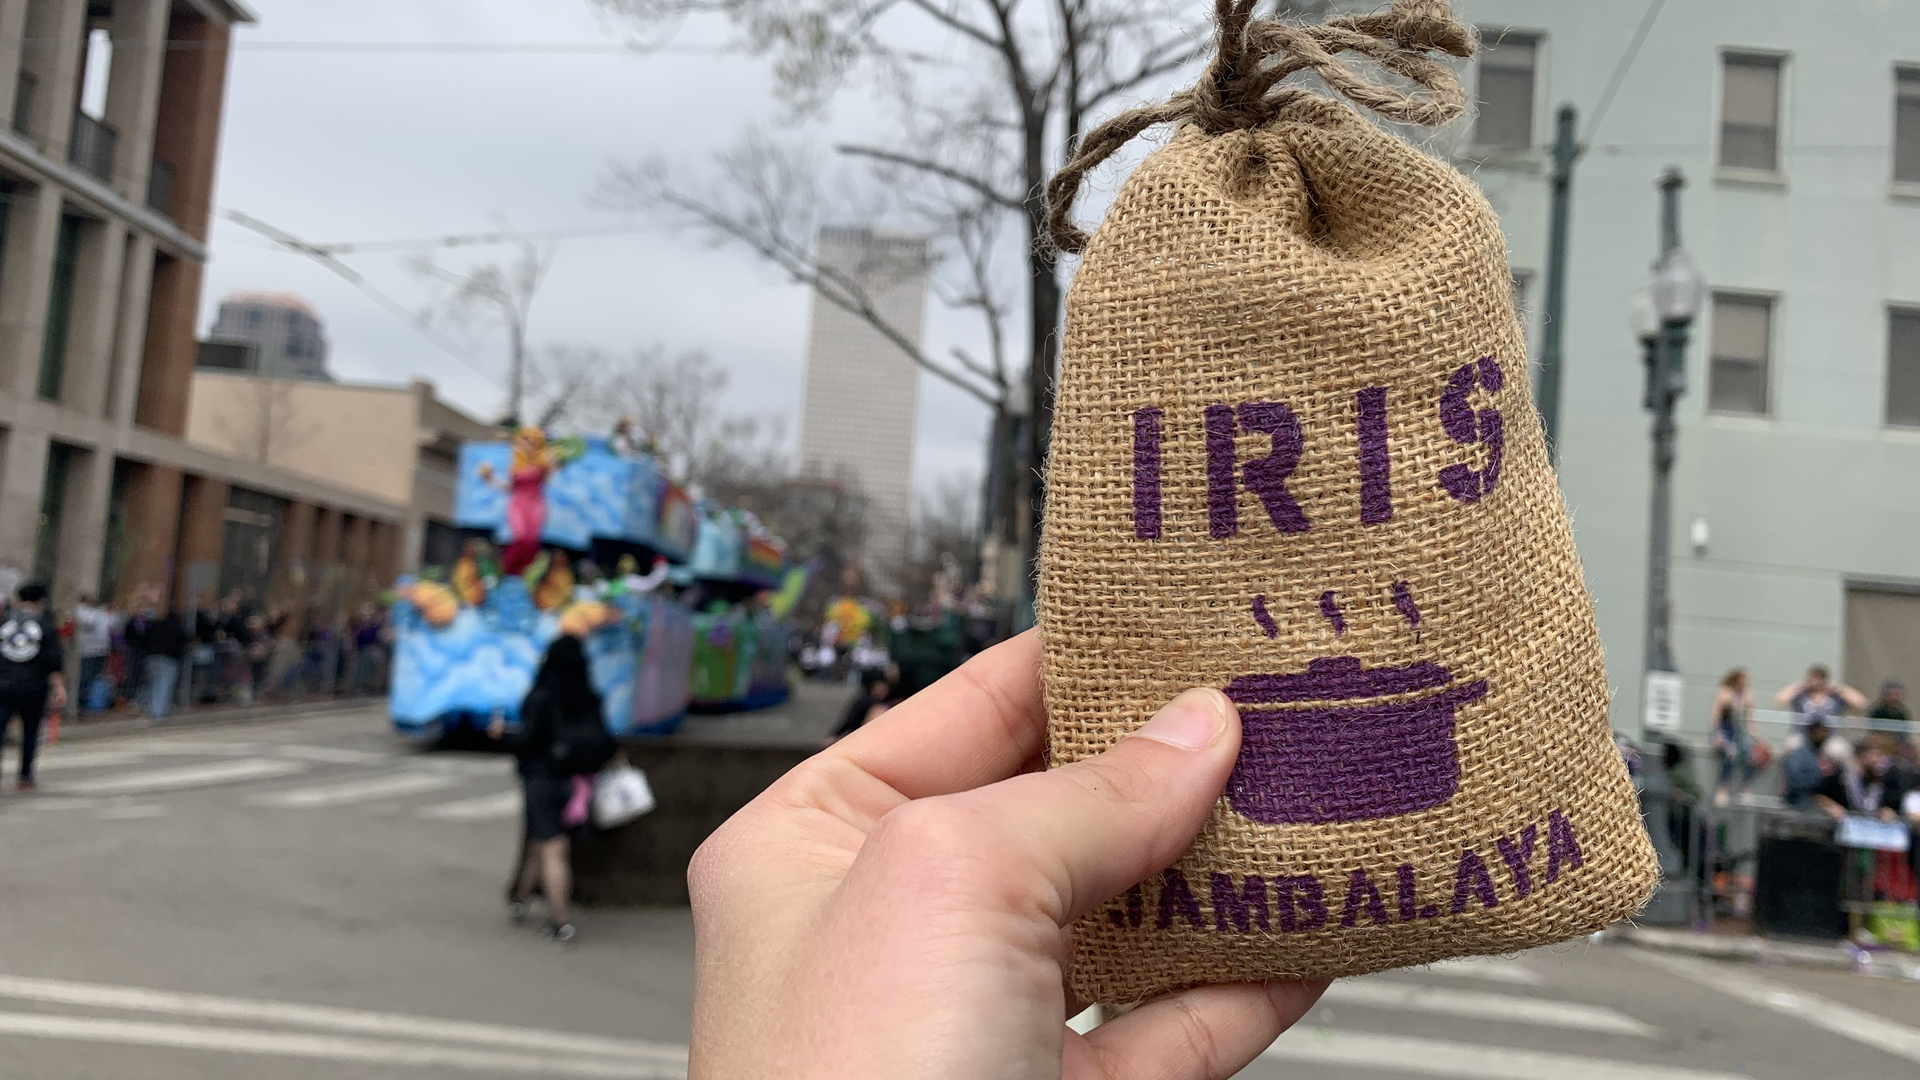 A hand holds up a small brown bag of jambalaya mix labeled with Iris.